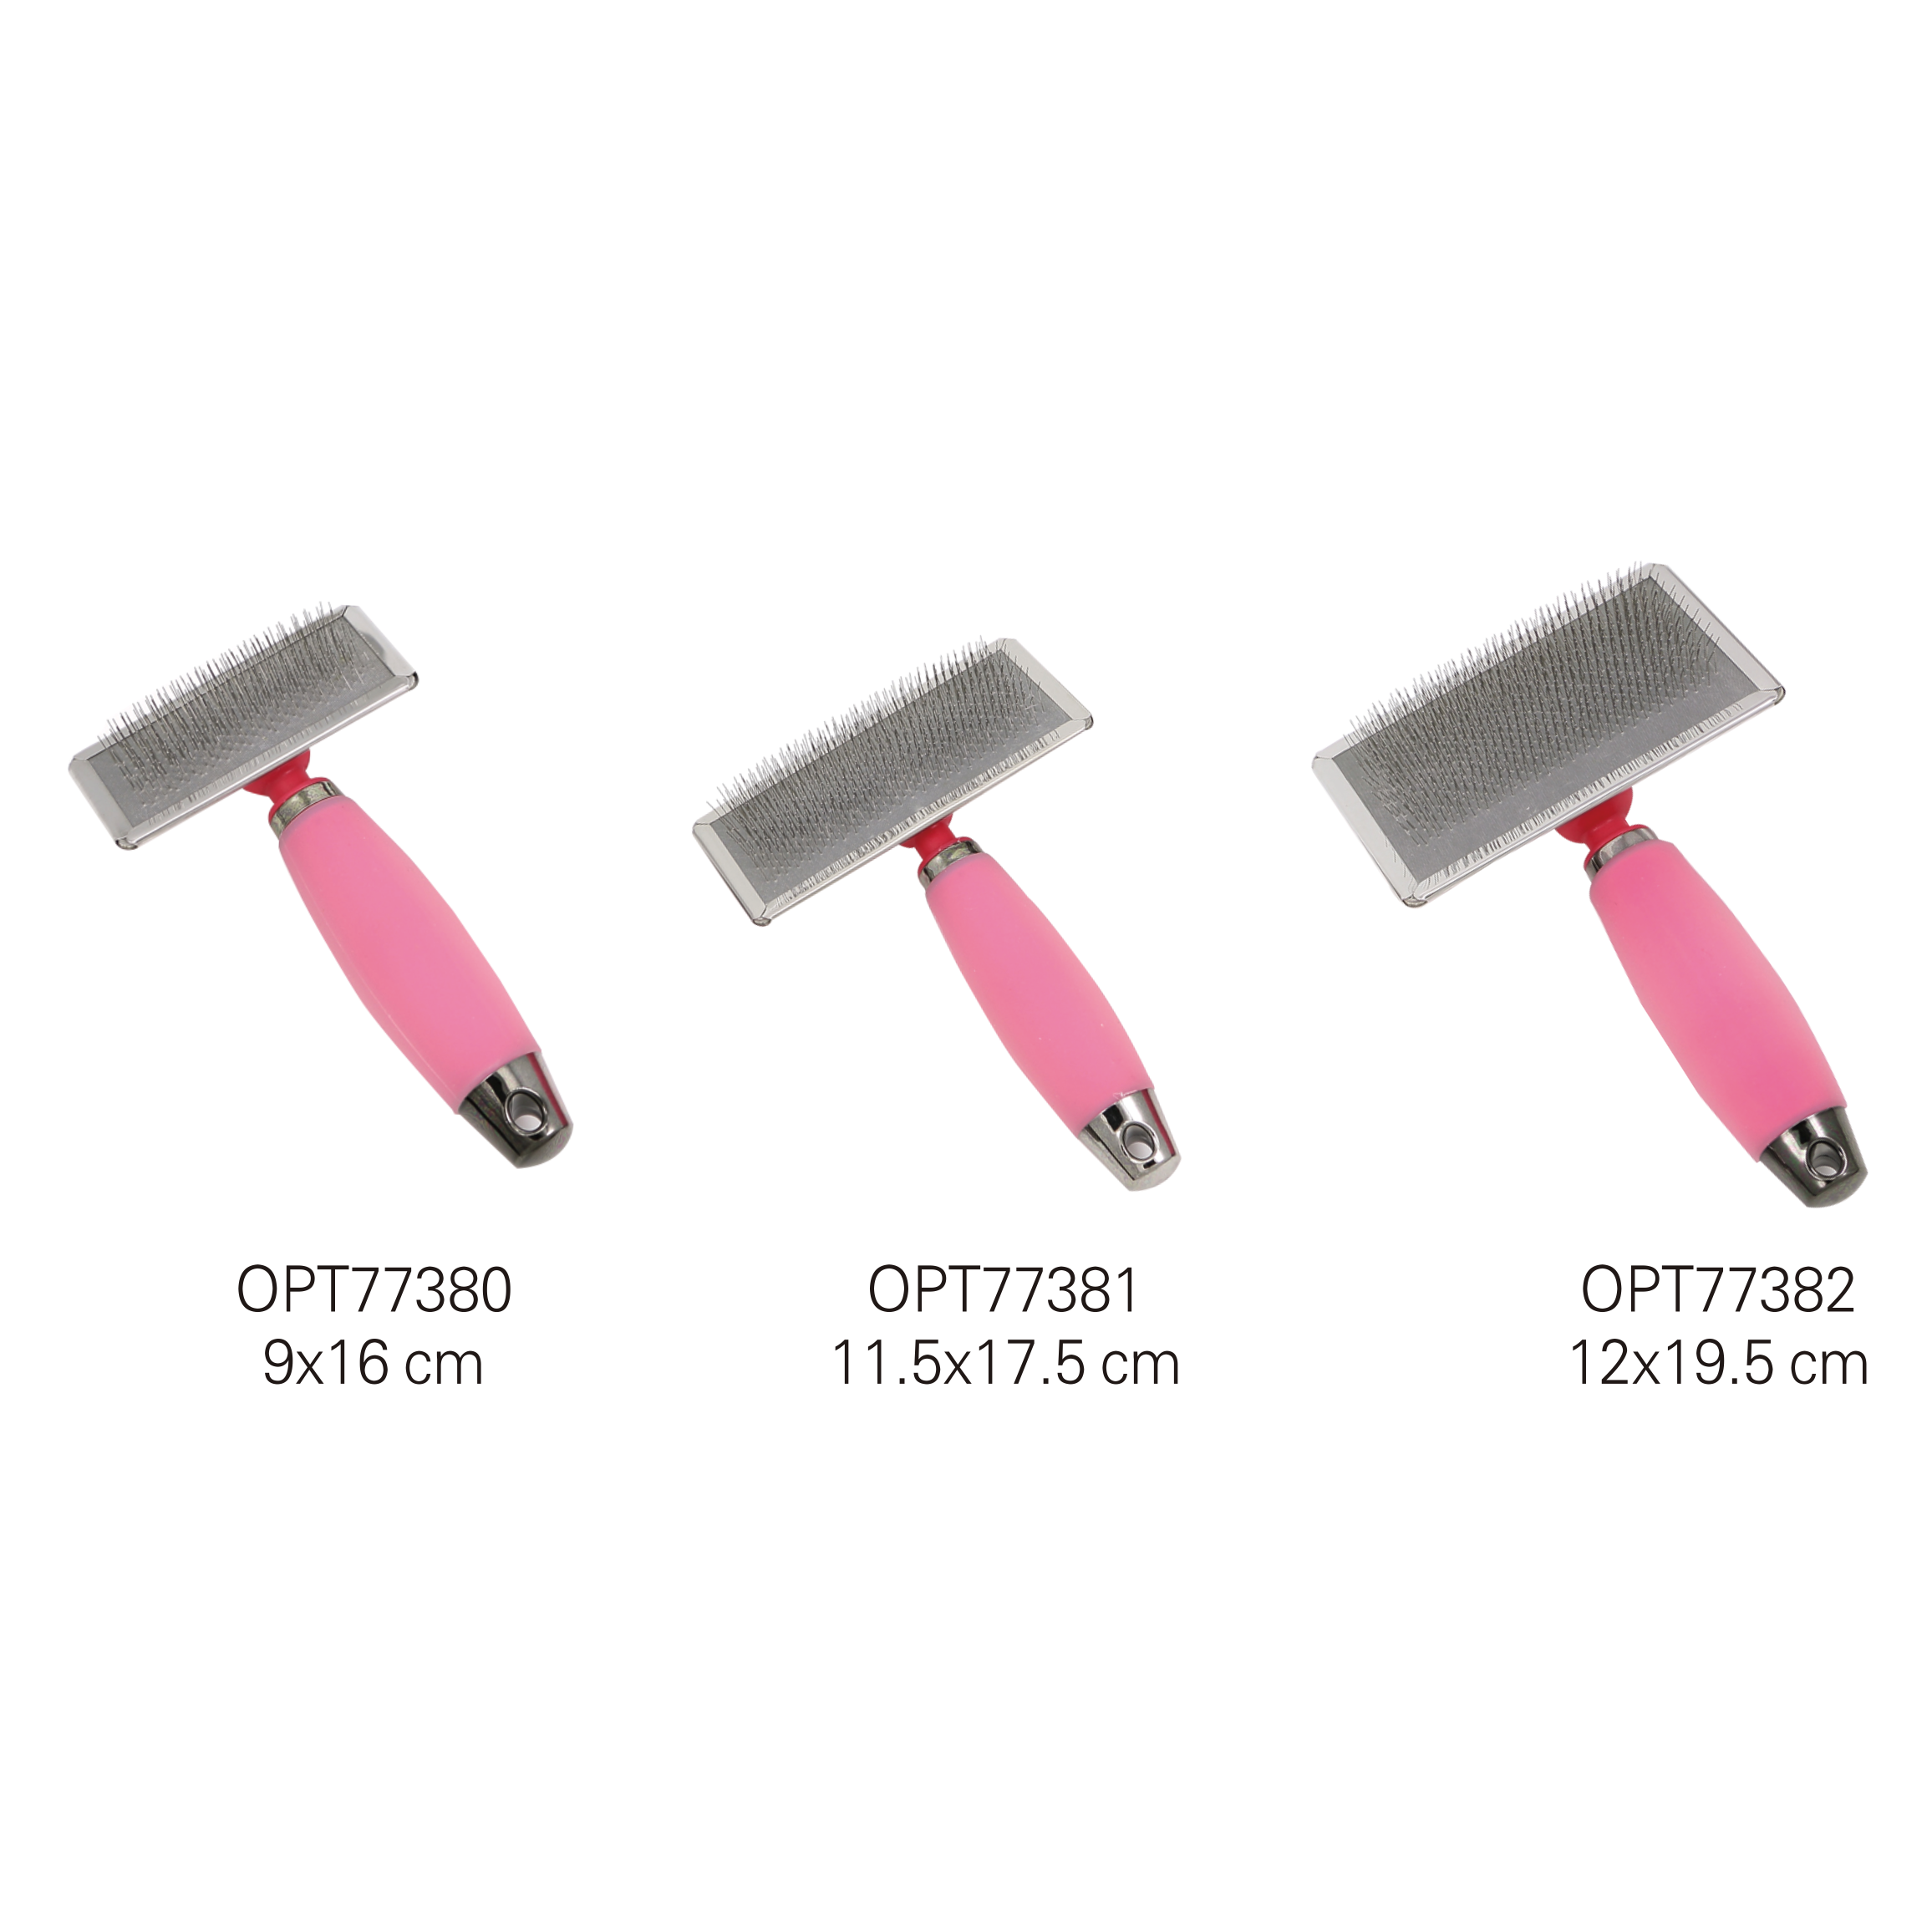 OPT77380-OPT77382 Grooming tools combs & brushes